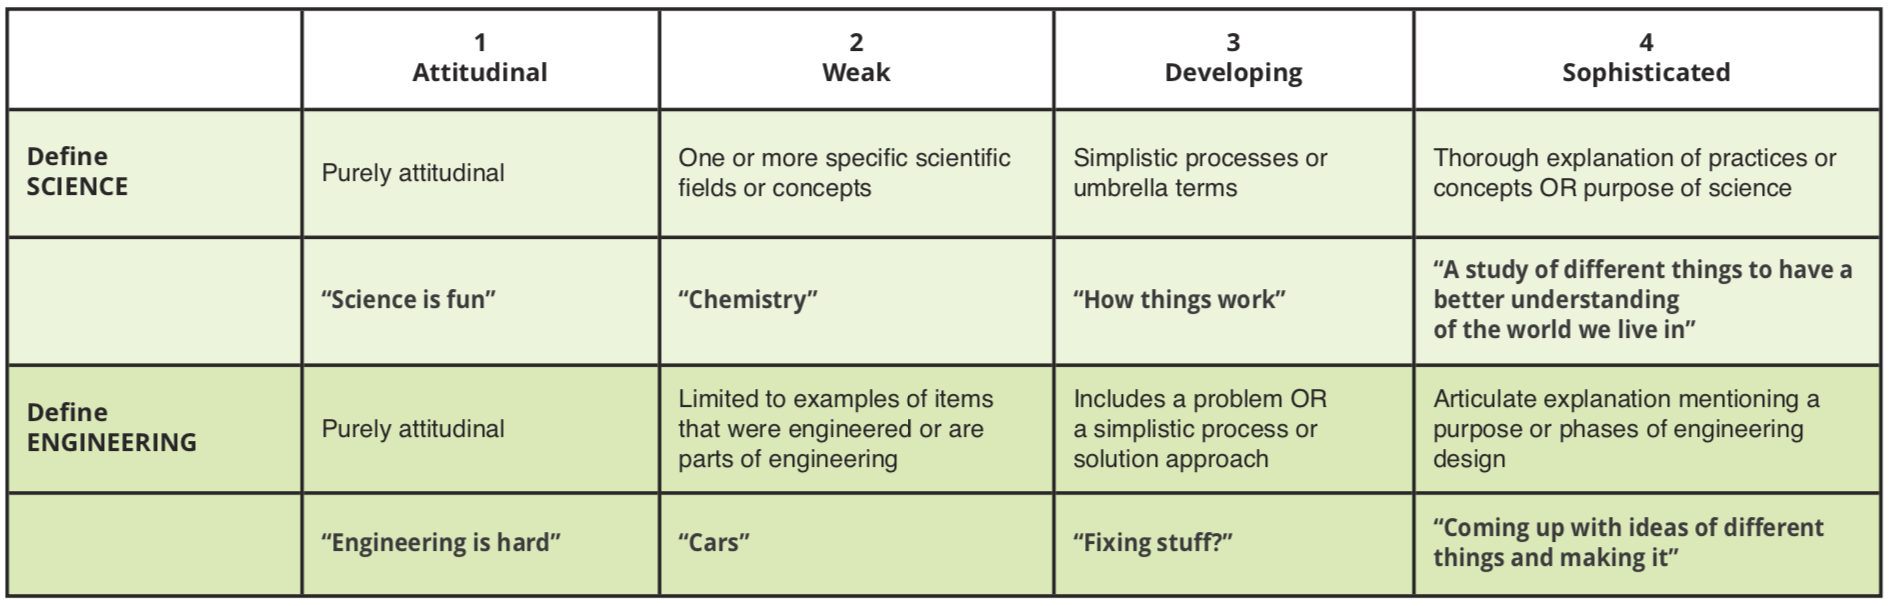 Science and Engineering Definitions Coding Rubic